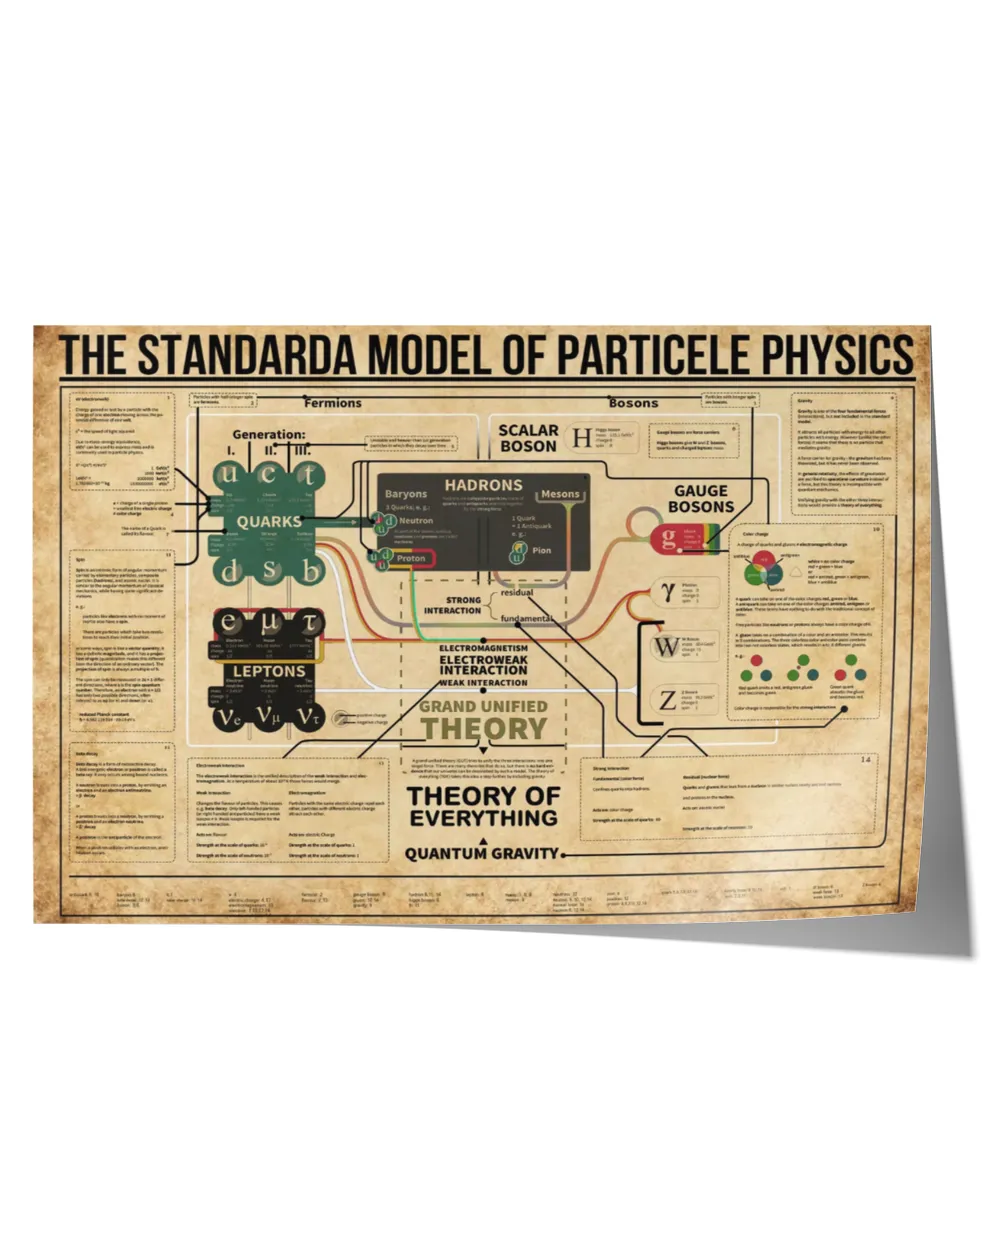 the standarda model of particele physics poster